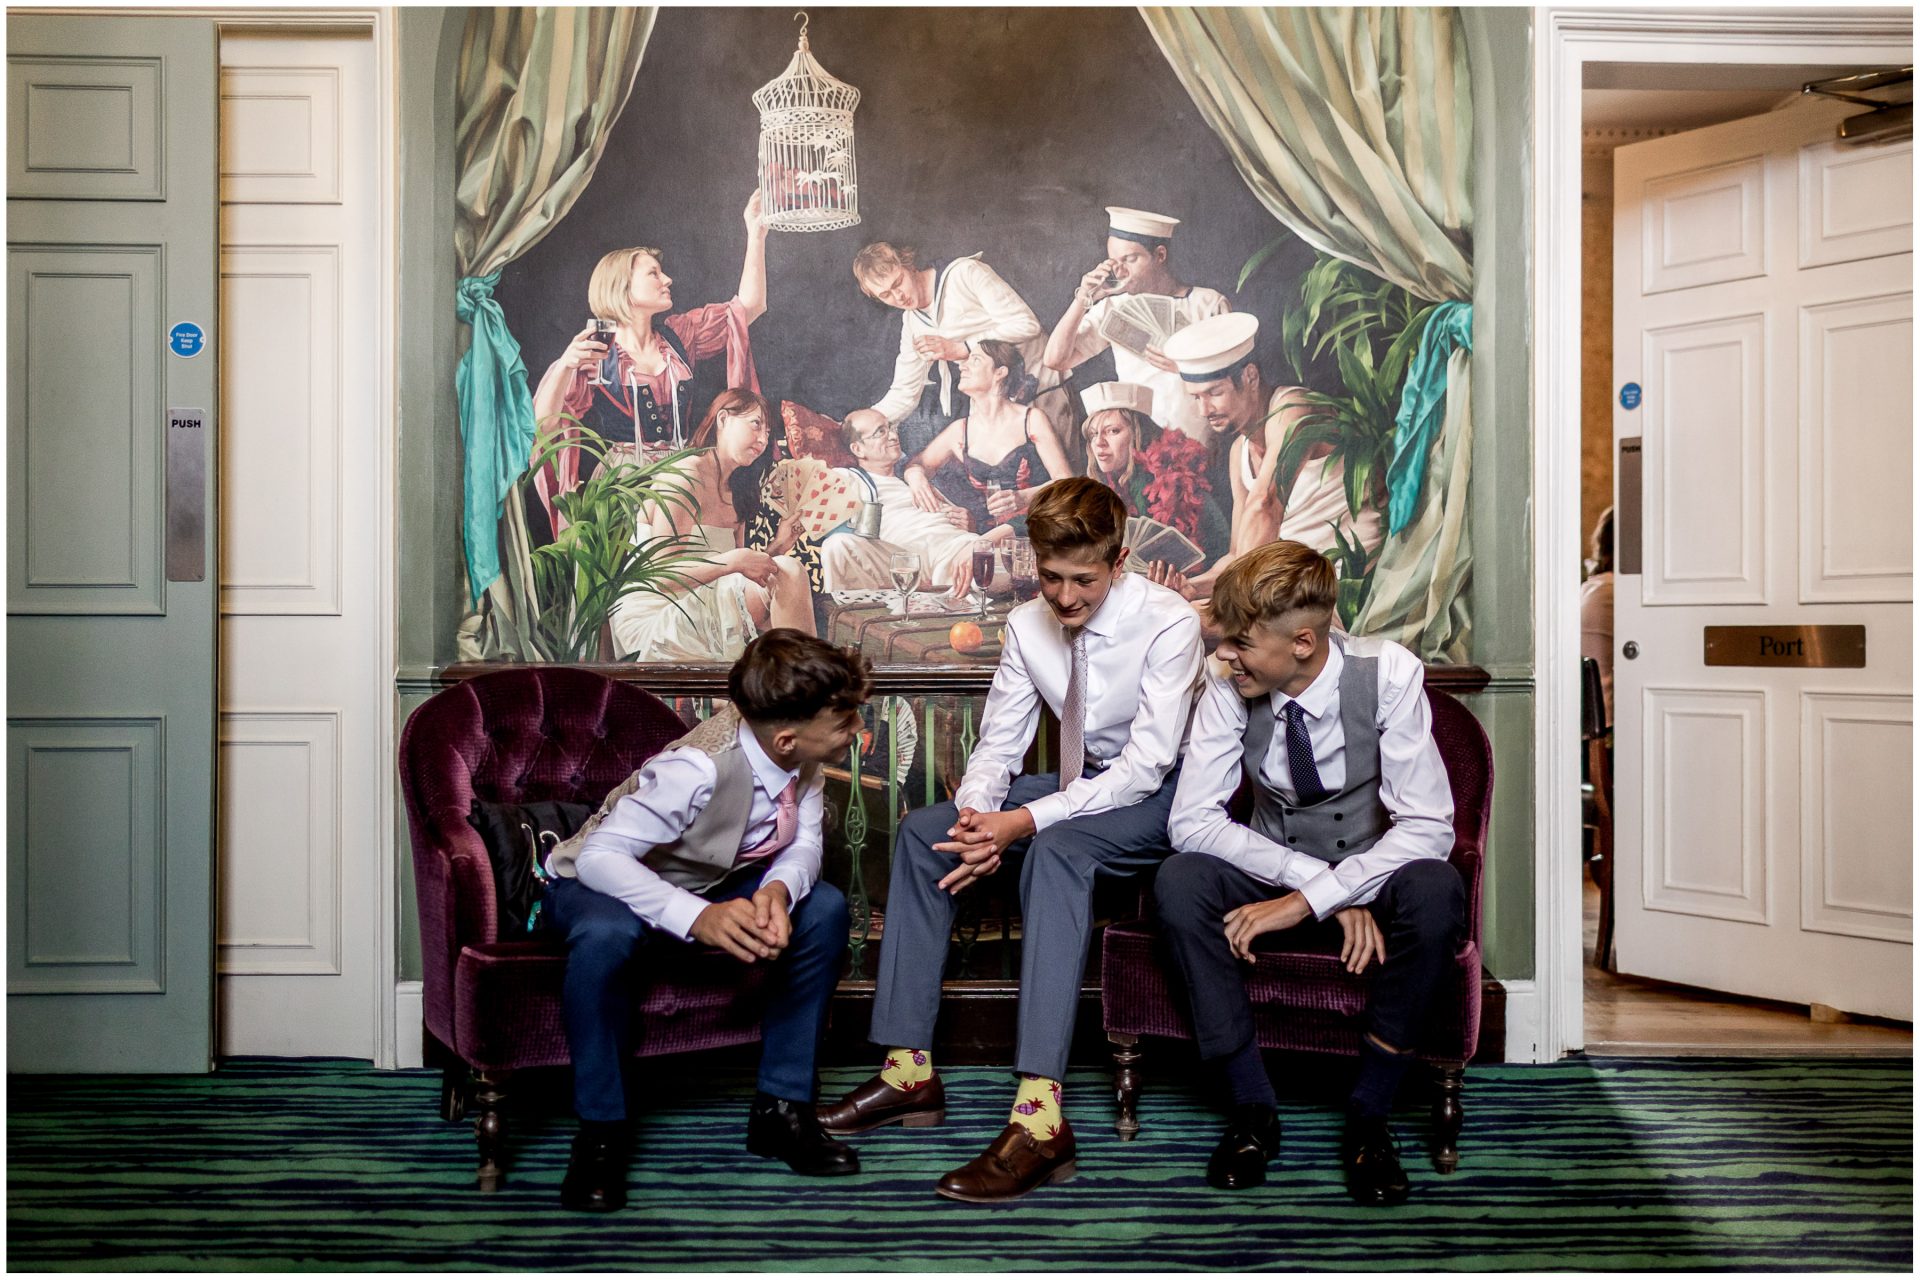 Three young men sitting in front of the mural on the hotel staircase